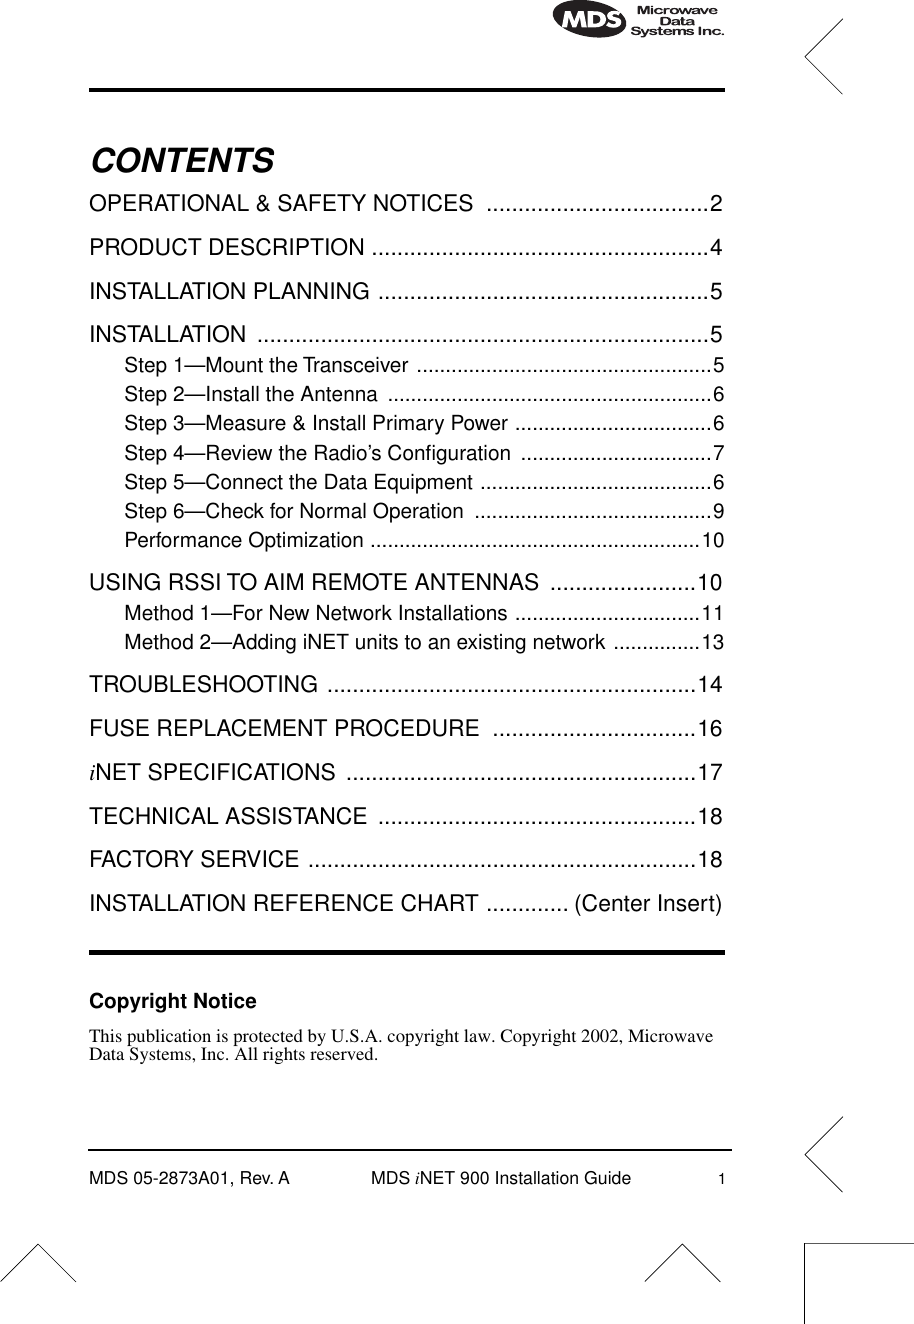  MDS 05-2873A01, Rev. A MDS  i NET 900 Installation Guide 1 CONTENTS OPERATIONAL &amp; SAFETY NOTICES  ...................................2PRODUCT DESCRIPTION .....................................................4INSTALLATION PLANNING ....................................................5INSTALLATION .......................................................................5 Step 1—Mount the Transceiver ...................................................5Step 2—Install the Antenna  ........................................................6Step 3—Measure &amp; Install Primary Power ..................................6Step 4—Review the Radio’s Conﬁguration  .................................7Step 5—Connect the Data Equipment ........................................6Step 6—Check for Normal Operation  .........................................9Performance Optimization .........................................................10 USING RSSI TO AIM REMOTE ANTENNAS  .......................10 Method 1—For New Network Installations ................................11Method 2—Adding iNET units to an existing network ...............13 TROUBLESHOOTING ..........................................................14FUSE REPLACEMENT PROCEDURE  ................................16 i NET SPECIFICATIONS  .......................................................17TECHNICAL ASSISTANCE  ..................................................18FACTORY SERVICE .............................................................18INSTALLATION REFERENCE CHART ............. (Center Insert) Copyright Notice This publication is protected by U.S.A. copyright law. Copyright 2002, Microwave Data Systems, Inc. All rights reserved.